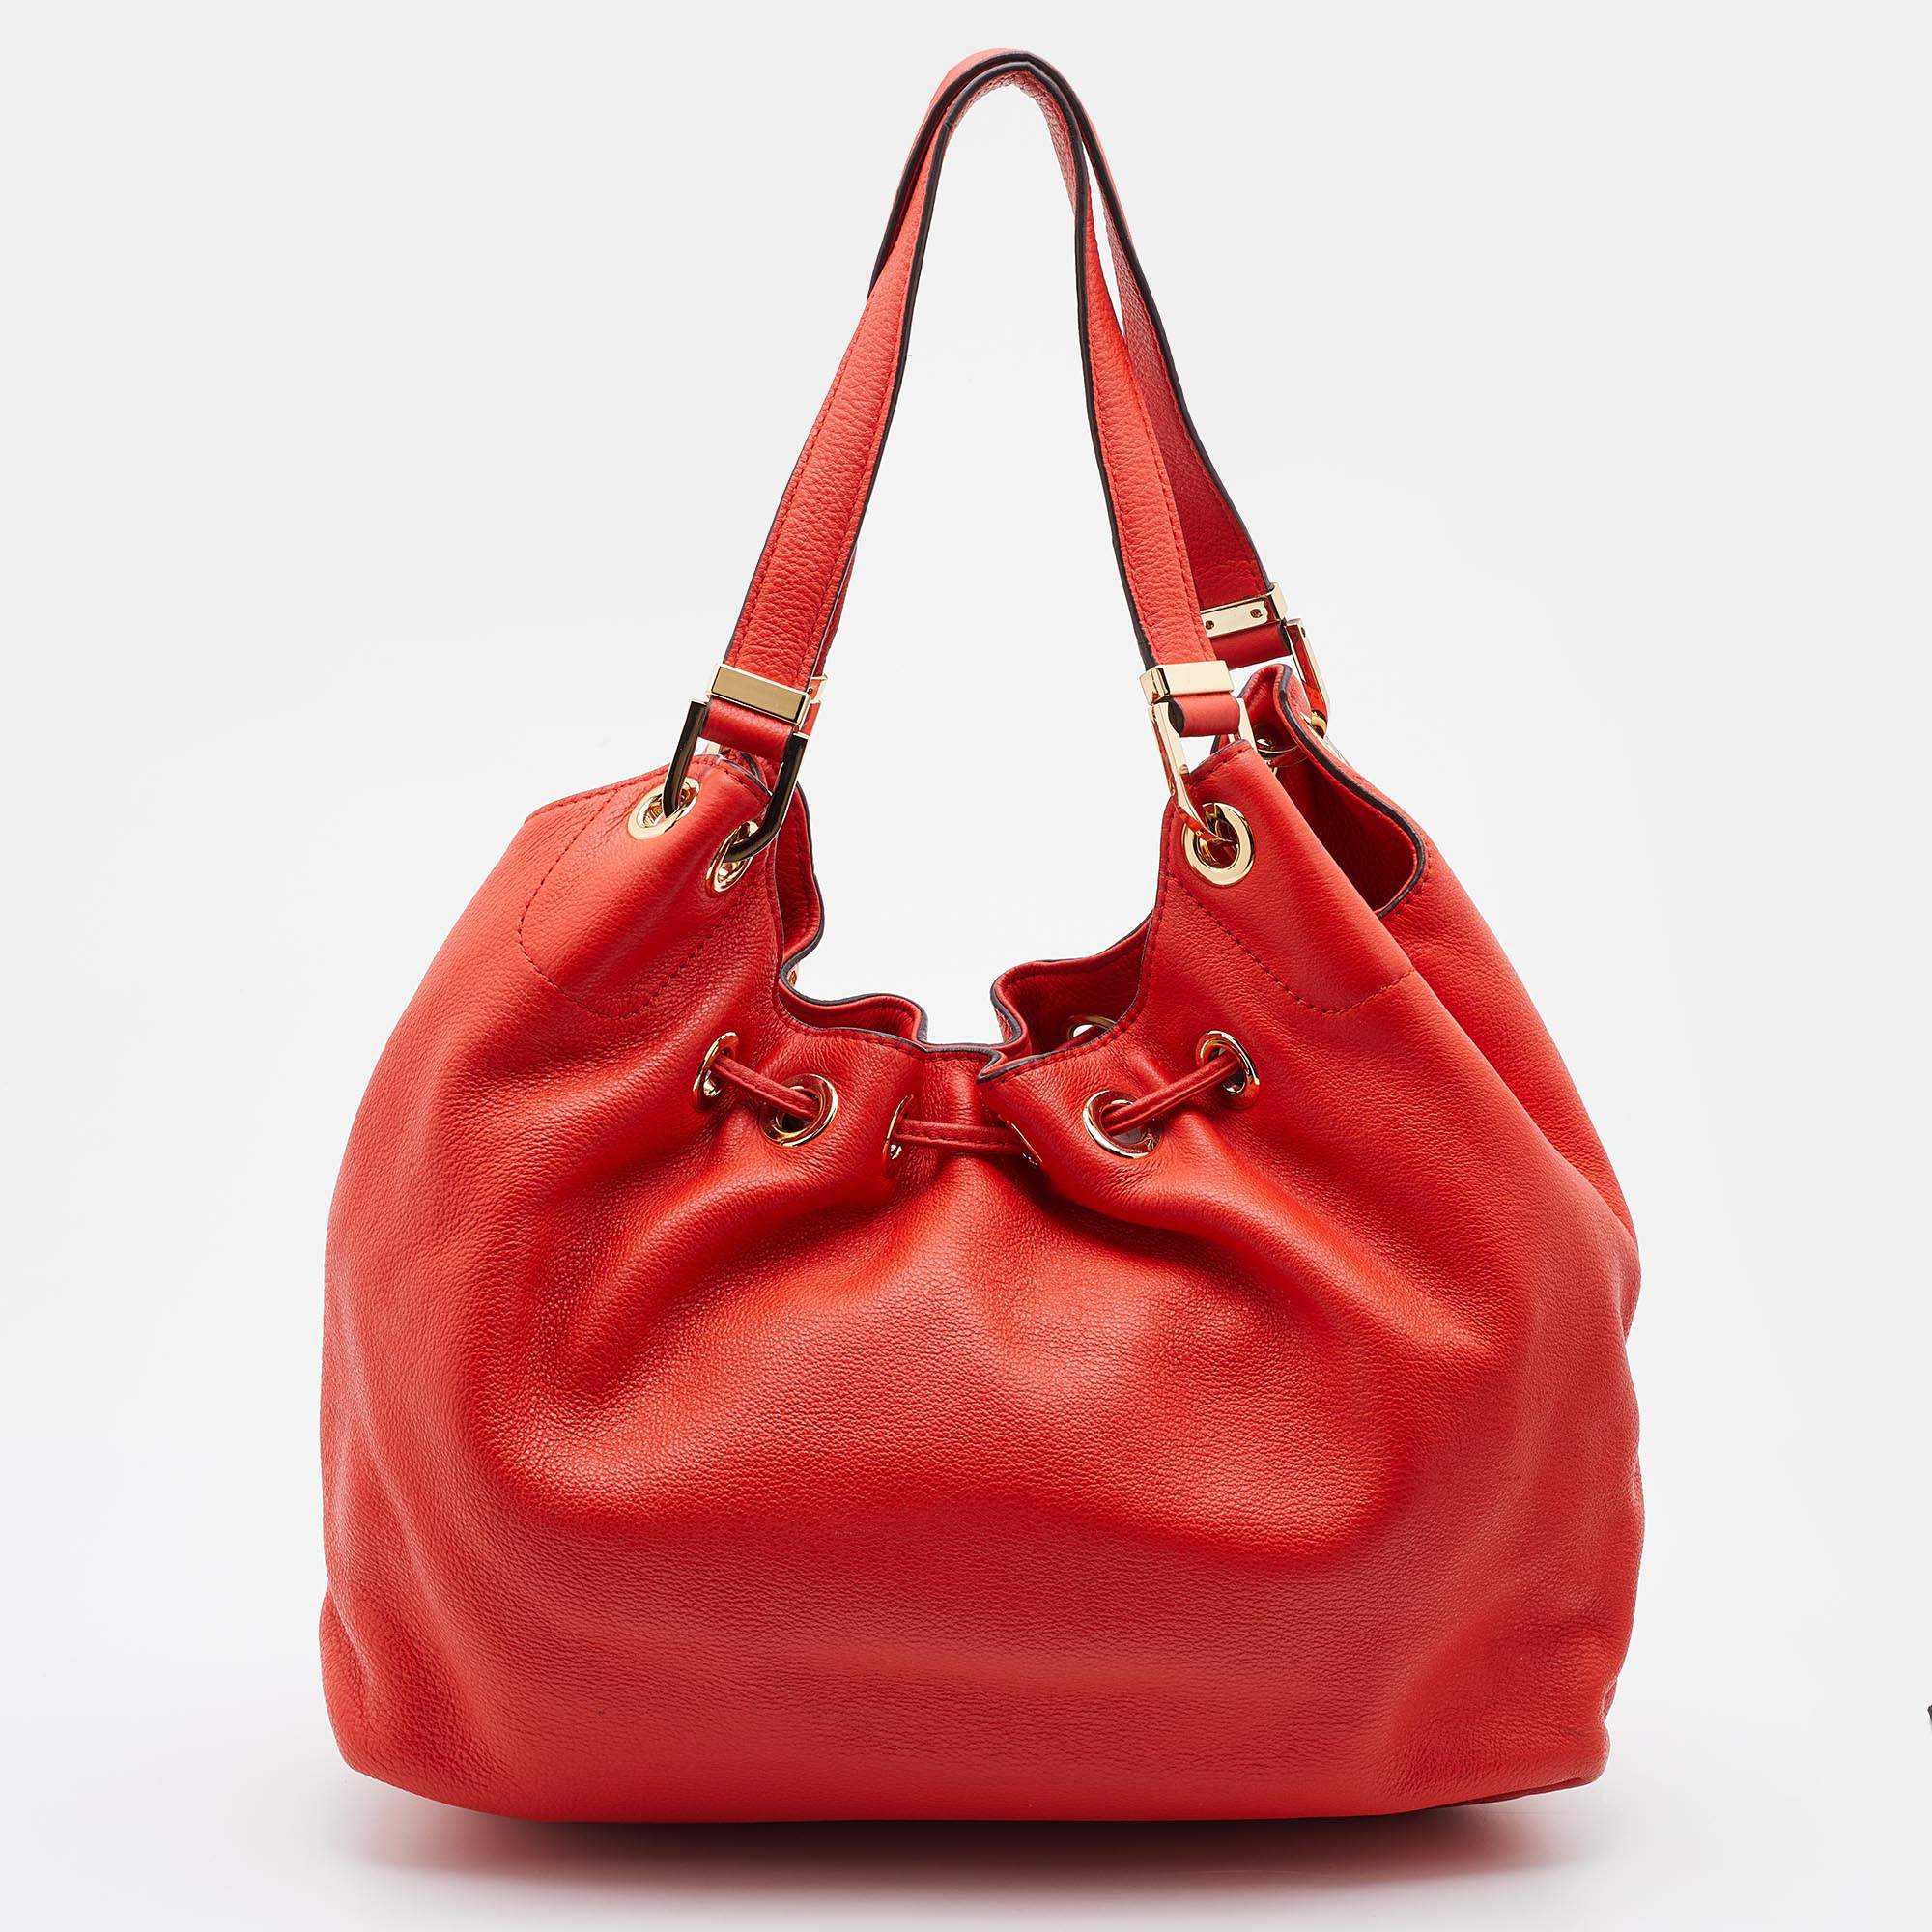 MICHAEL KORS Camden Large Red Soft Leather Drawstring Tote